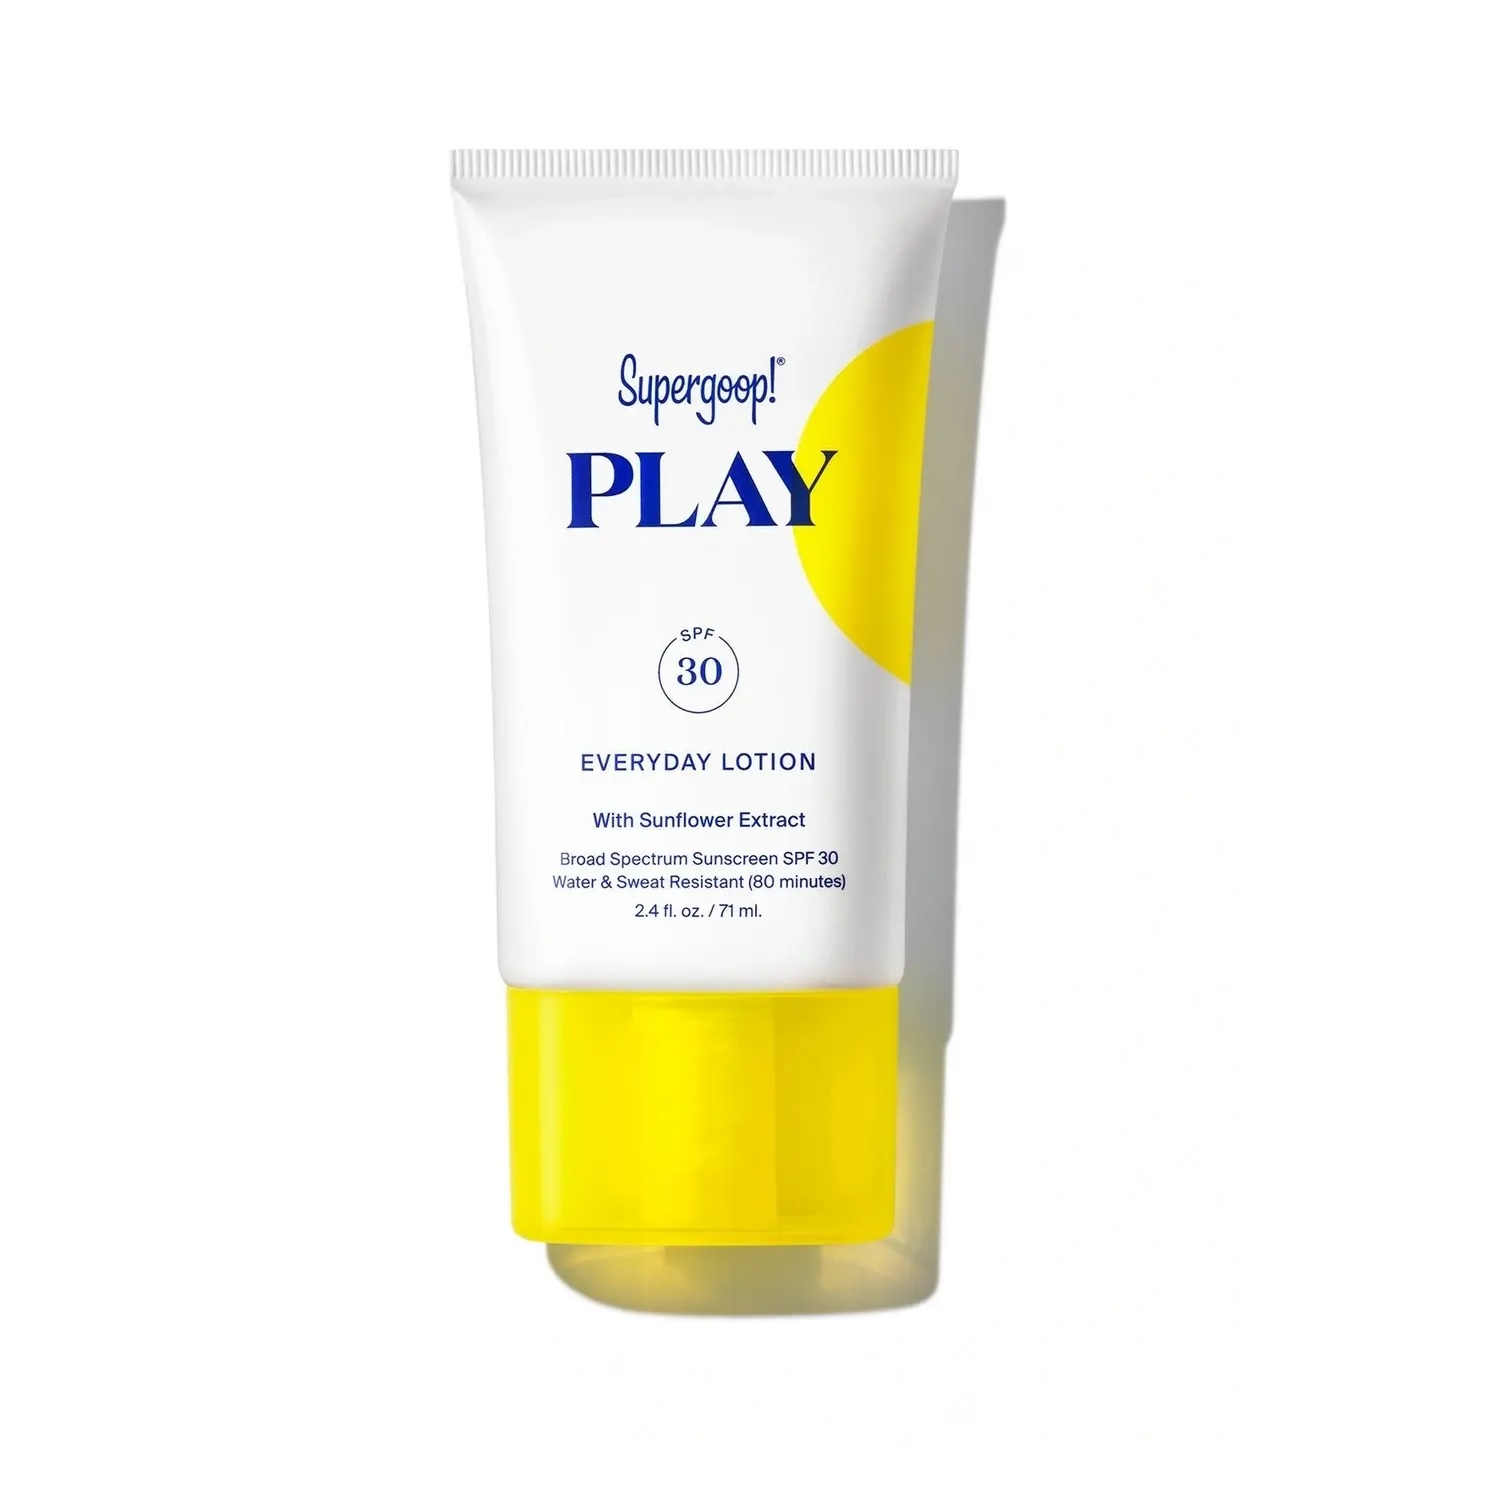 PLAY EVERYDAY LOTION SPF 30 WITH SUNFLOWER EXTRACT